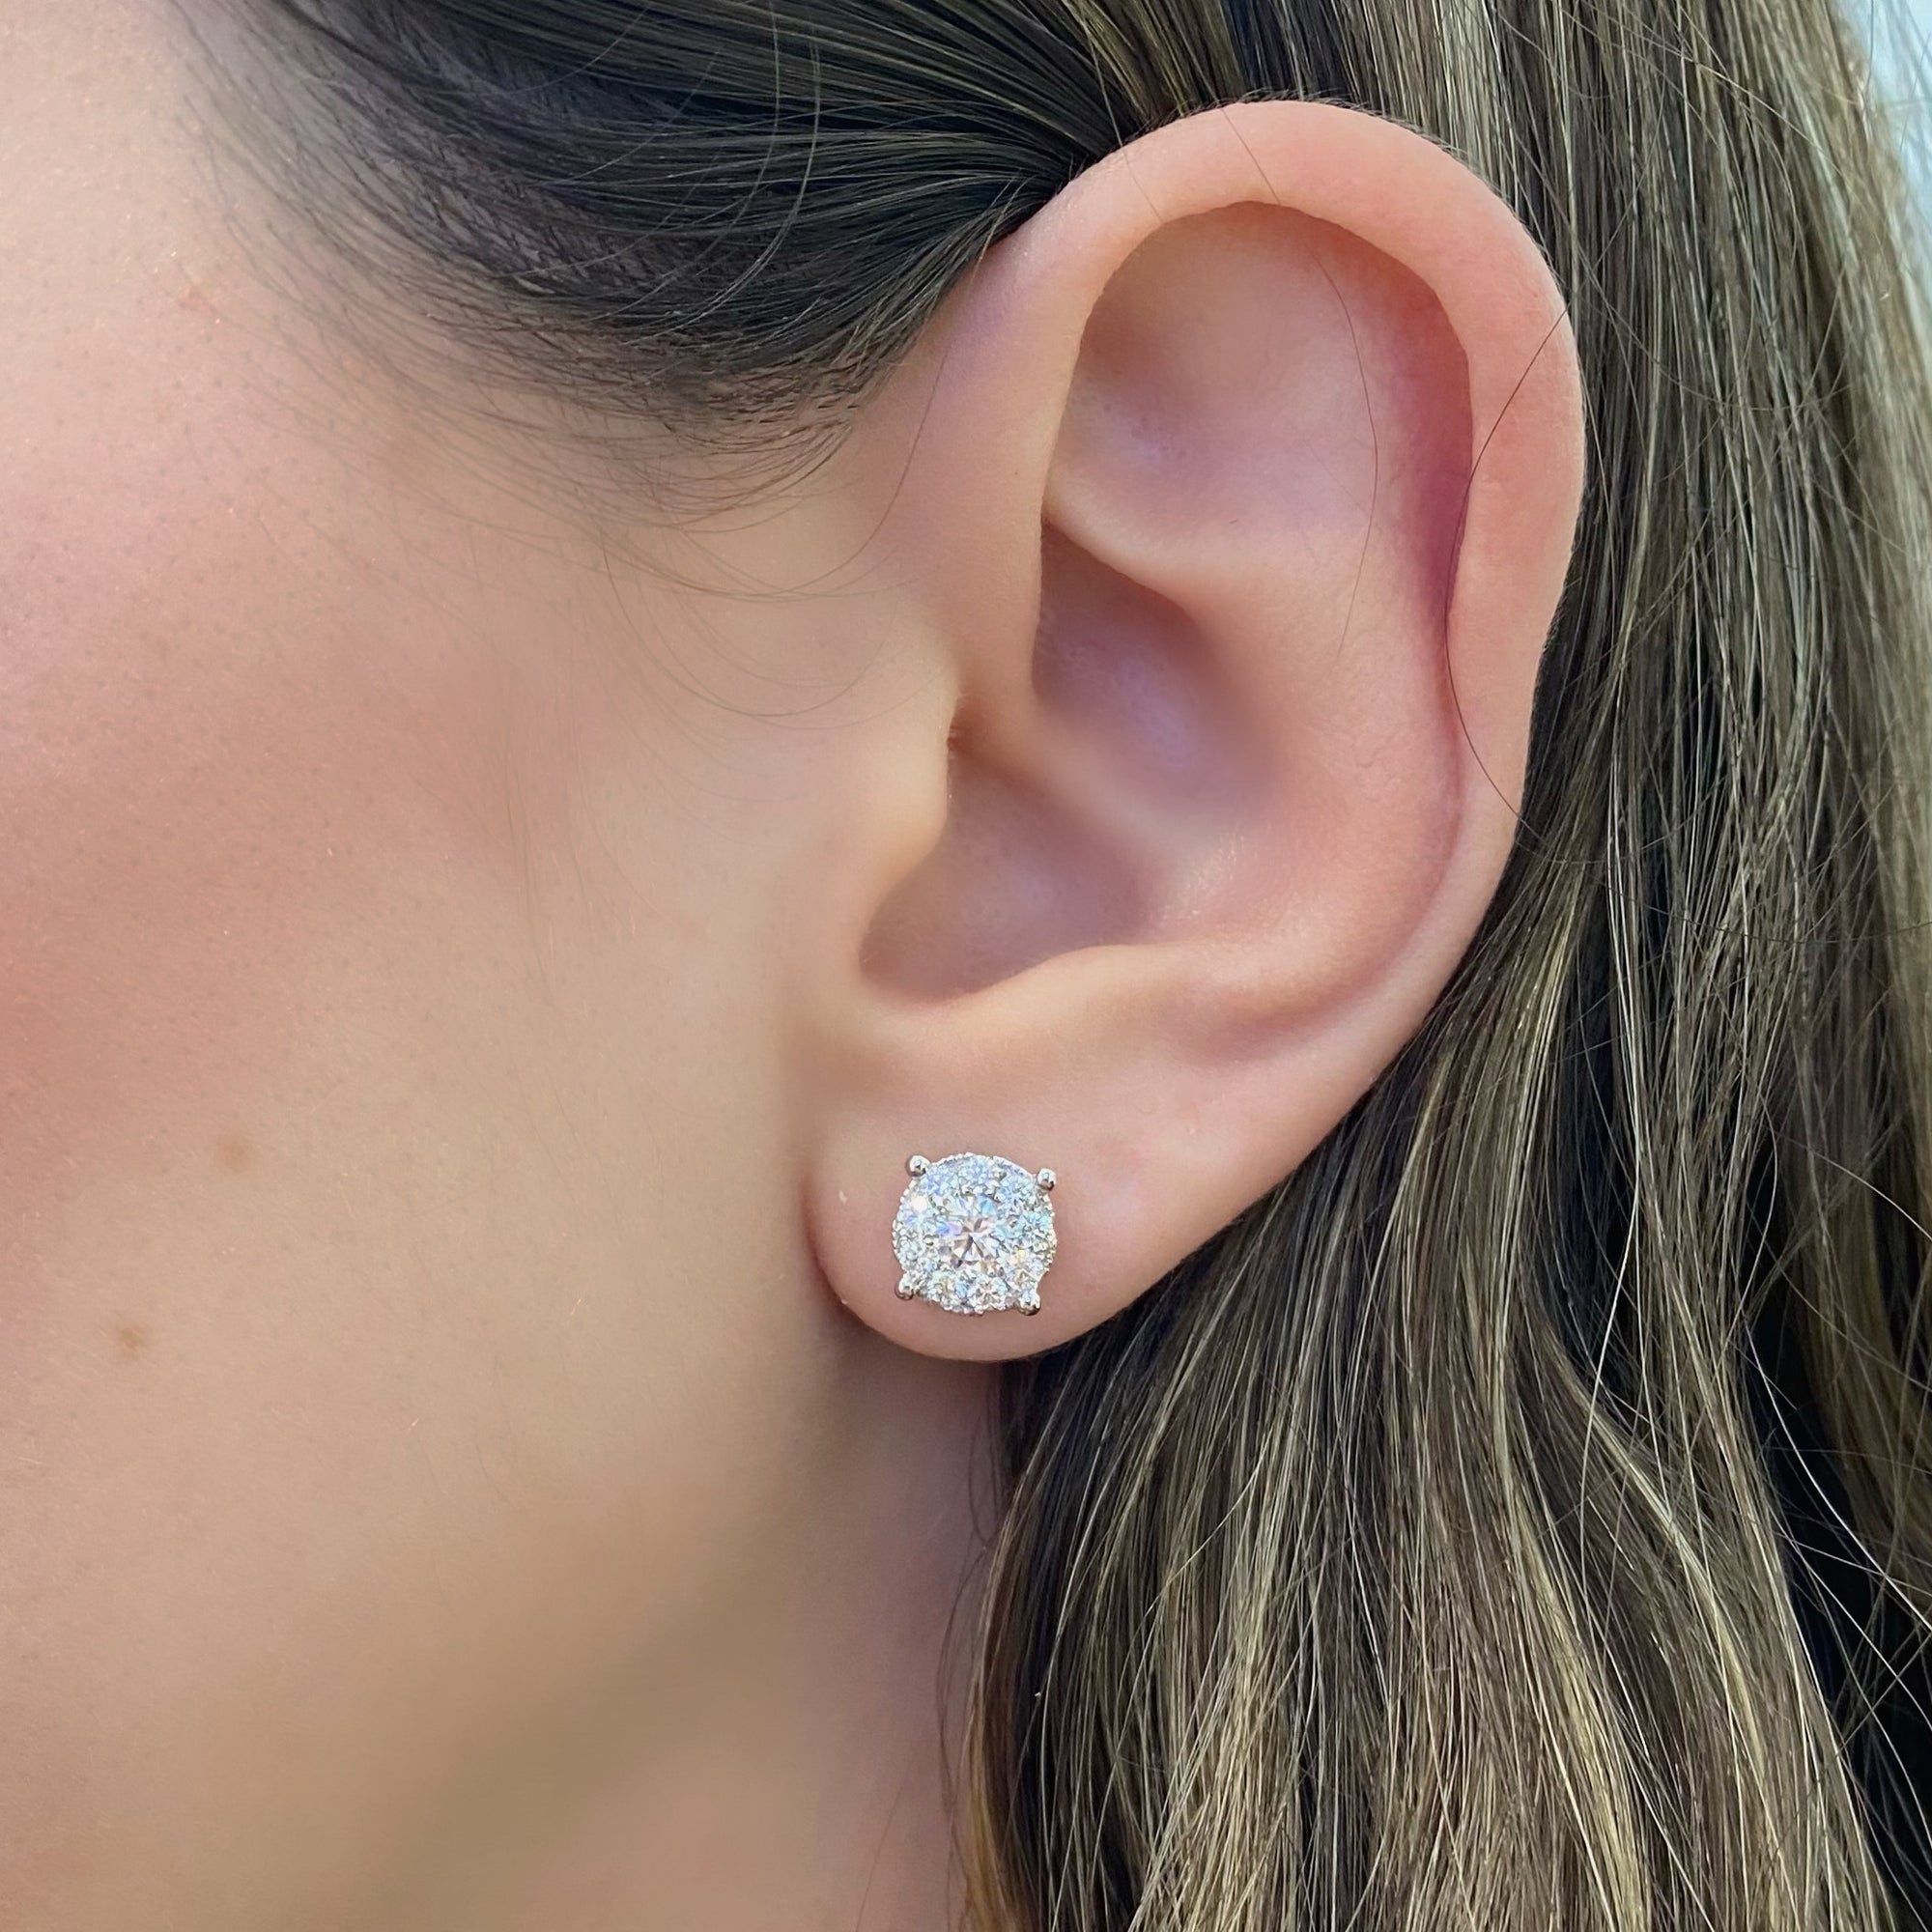 1.22 ct round diamond cluster earrings - 18K gold weighing 1.97 grams  - 18 round diamonds totaling 0.60 carats  - 2 round diamonds totaling 0.62 carats